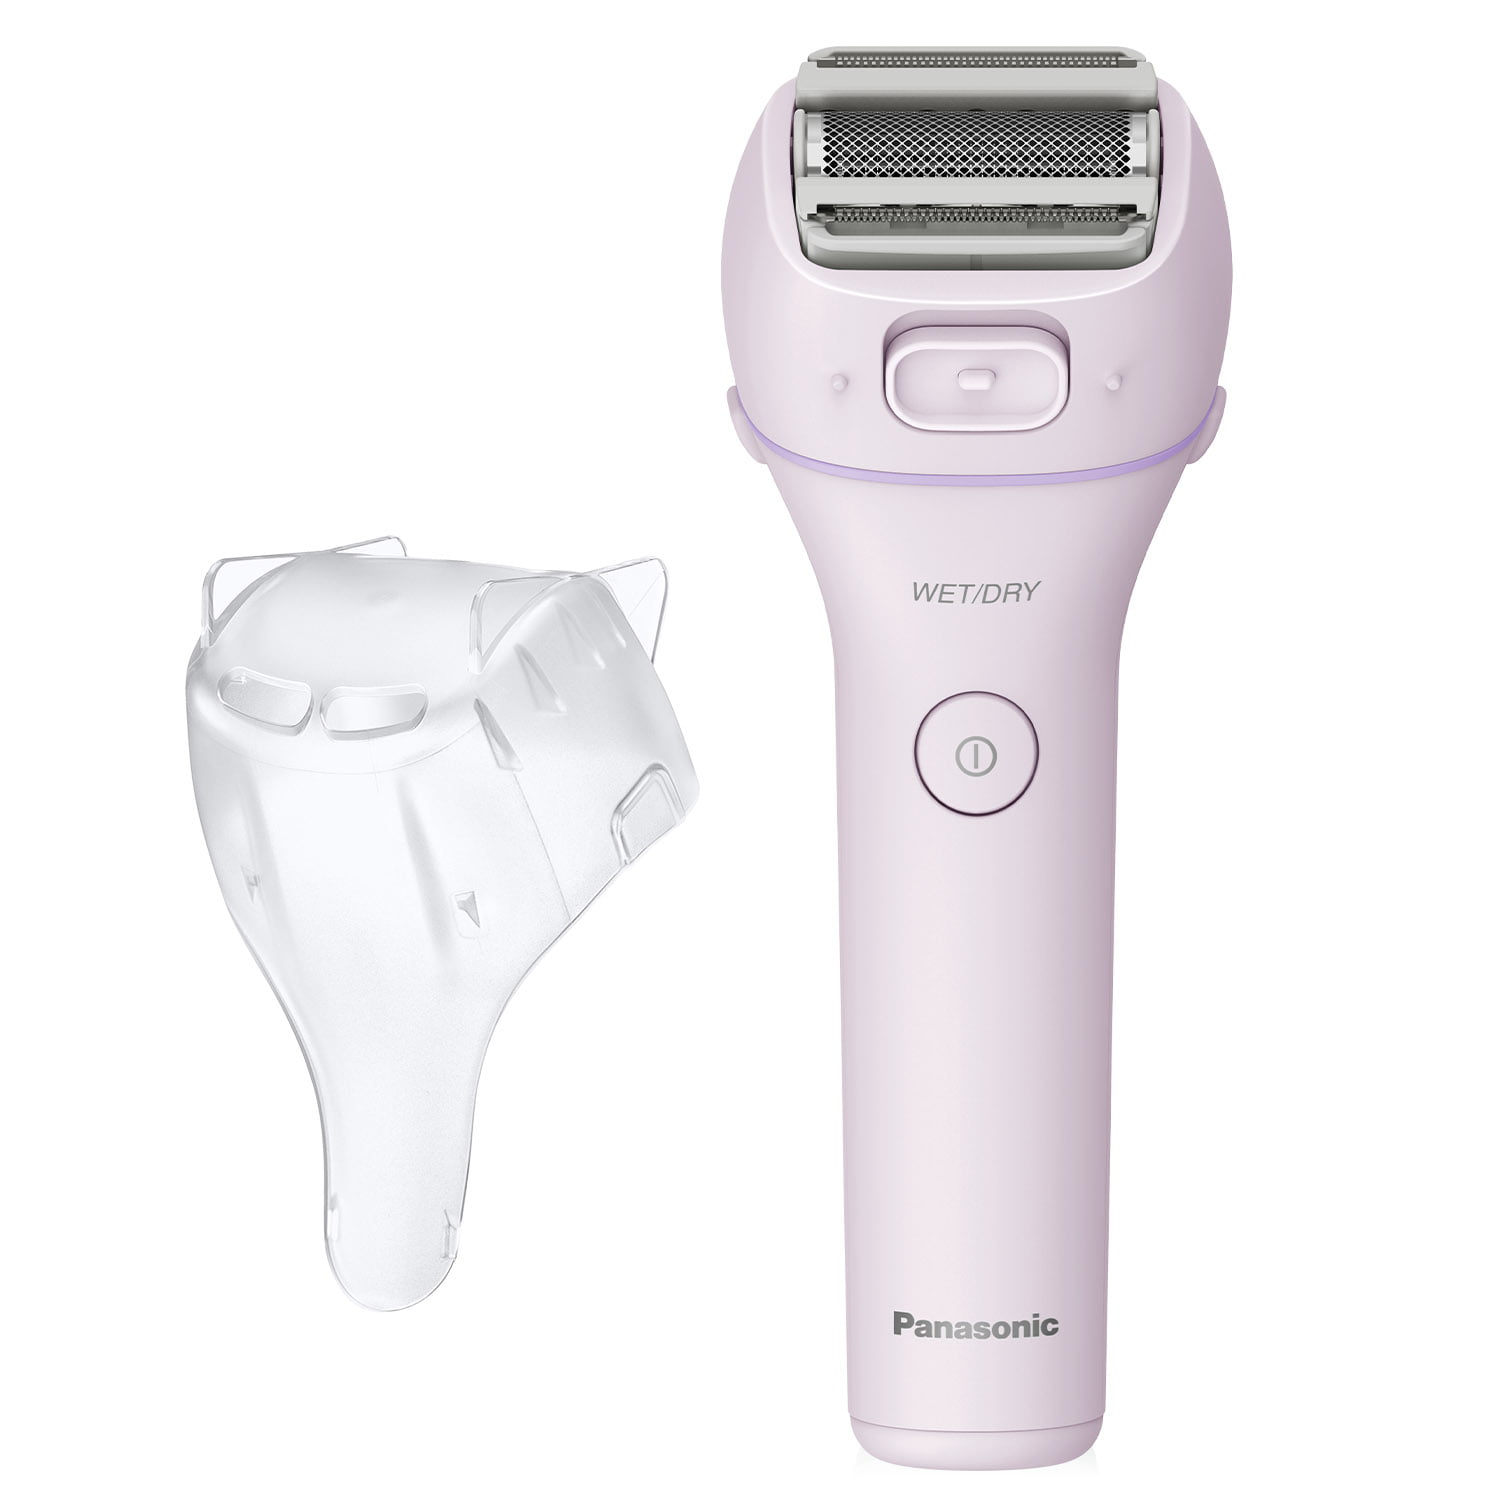 Panasonic Women's Electric Shaver with Trimmer (Wet/Dry)